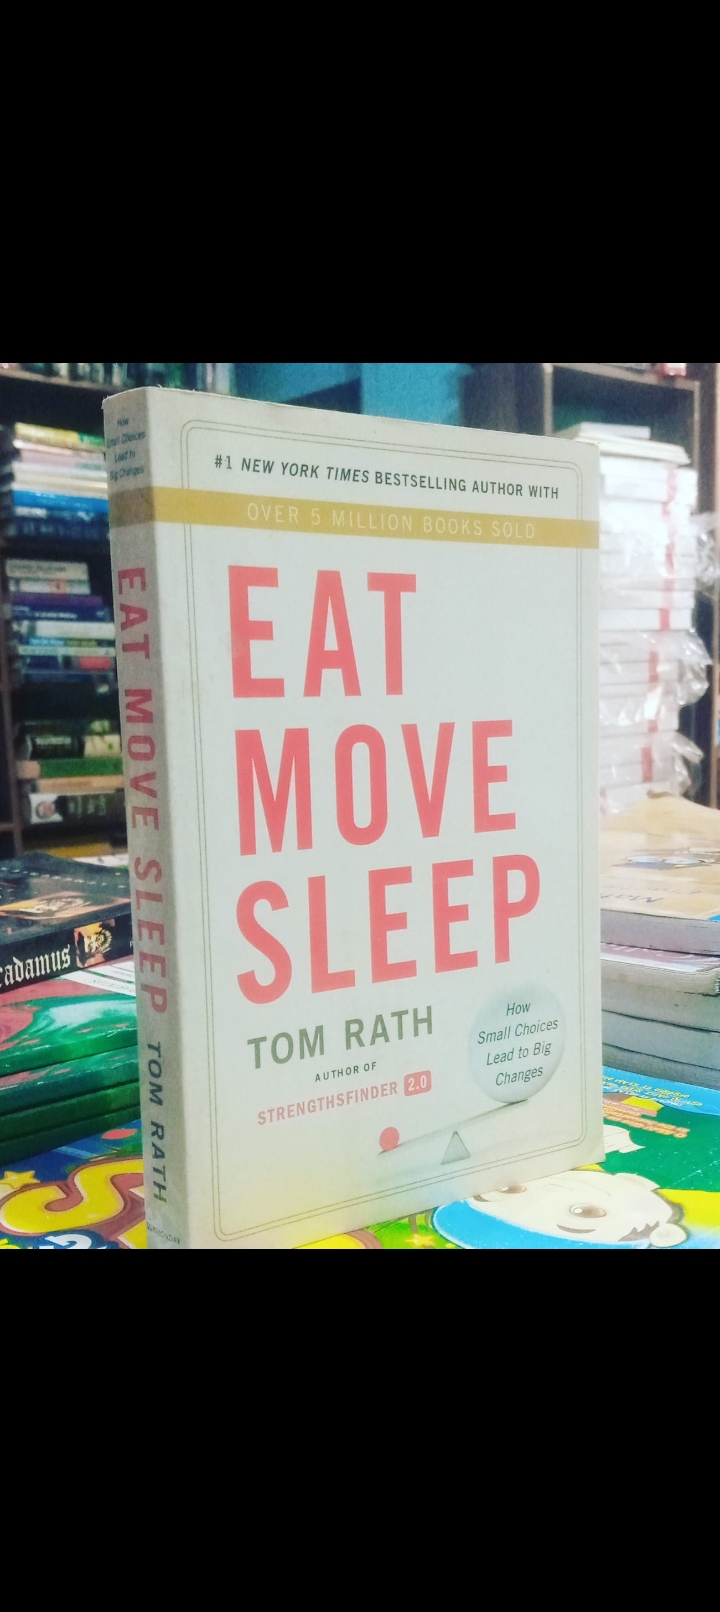 eat move sleep by tom rath author of strengthsfinder 2.0. original paperback like new